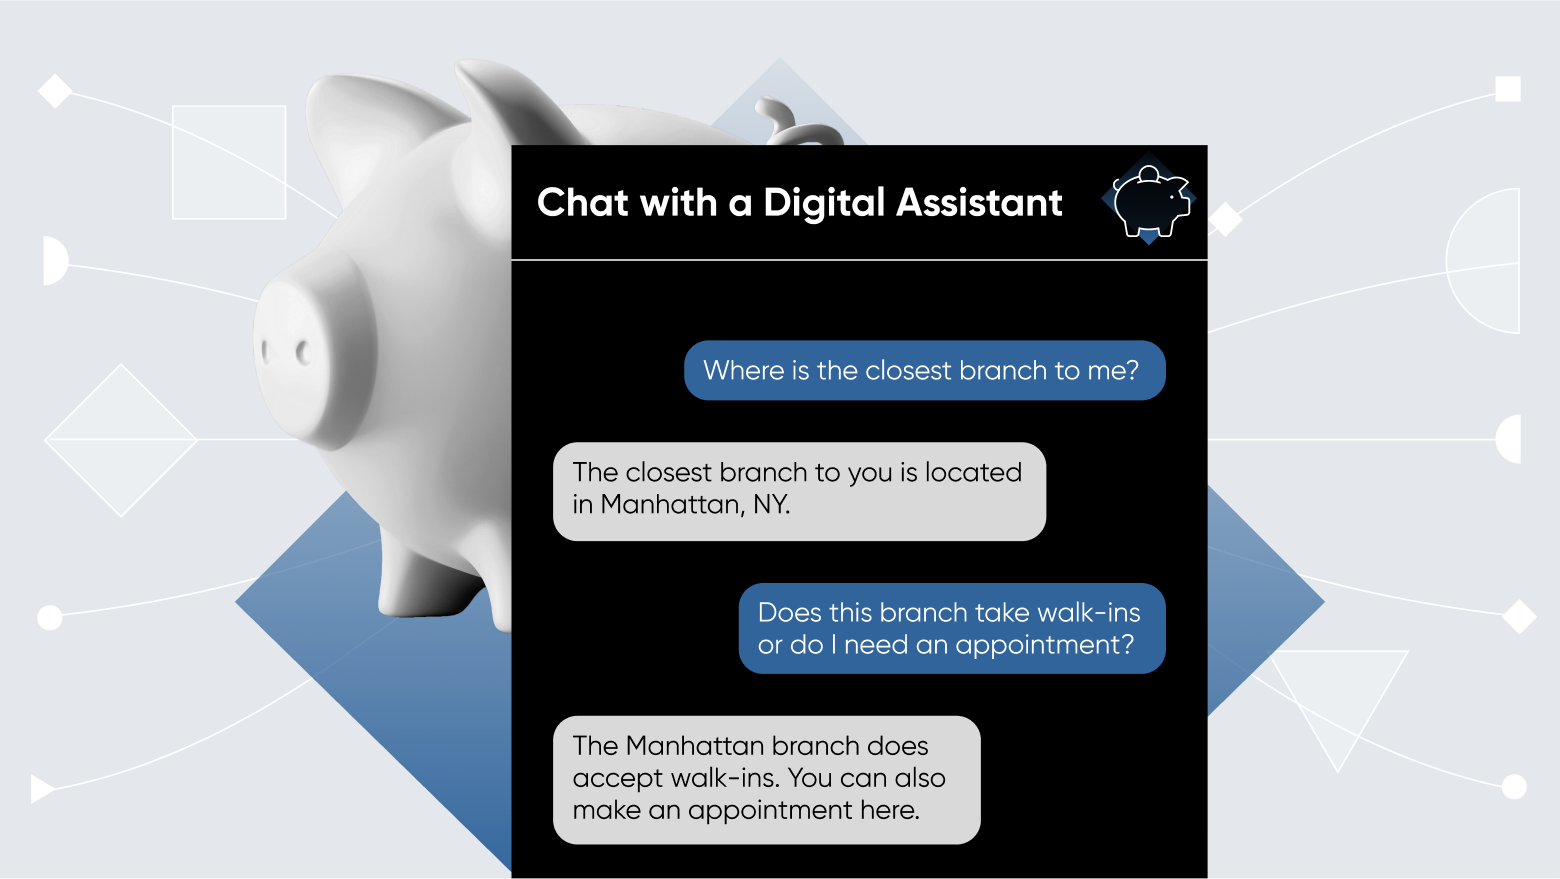 A chat box open to a conversation with a digital assistant. The chat reads: "Where is the closest branch to me?"
"The closest branch to you is located in Manhattan, NY."
"Does this branch take walk-ins or do I need an appointment?"
"The Manhattan branch does accept walk-ins. You can also make an appointment here."